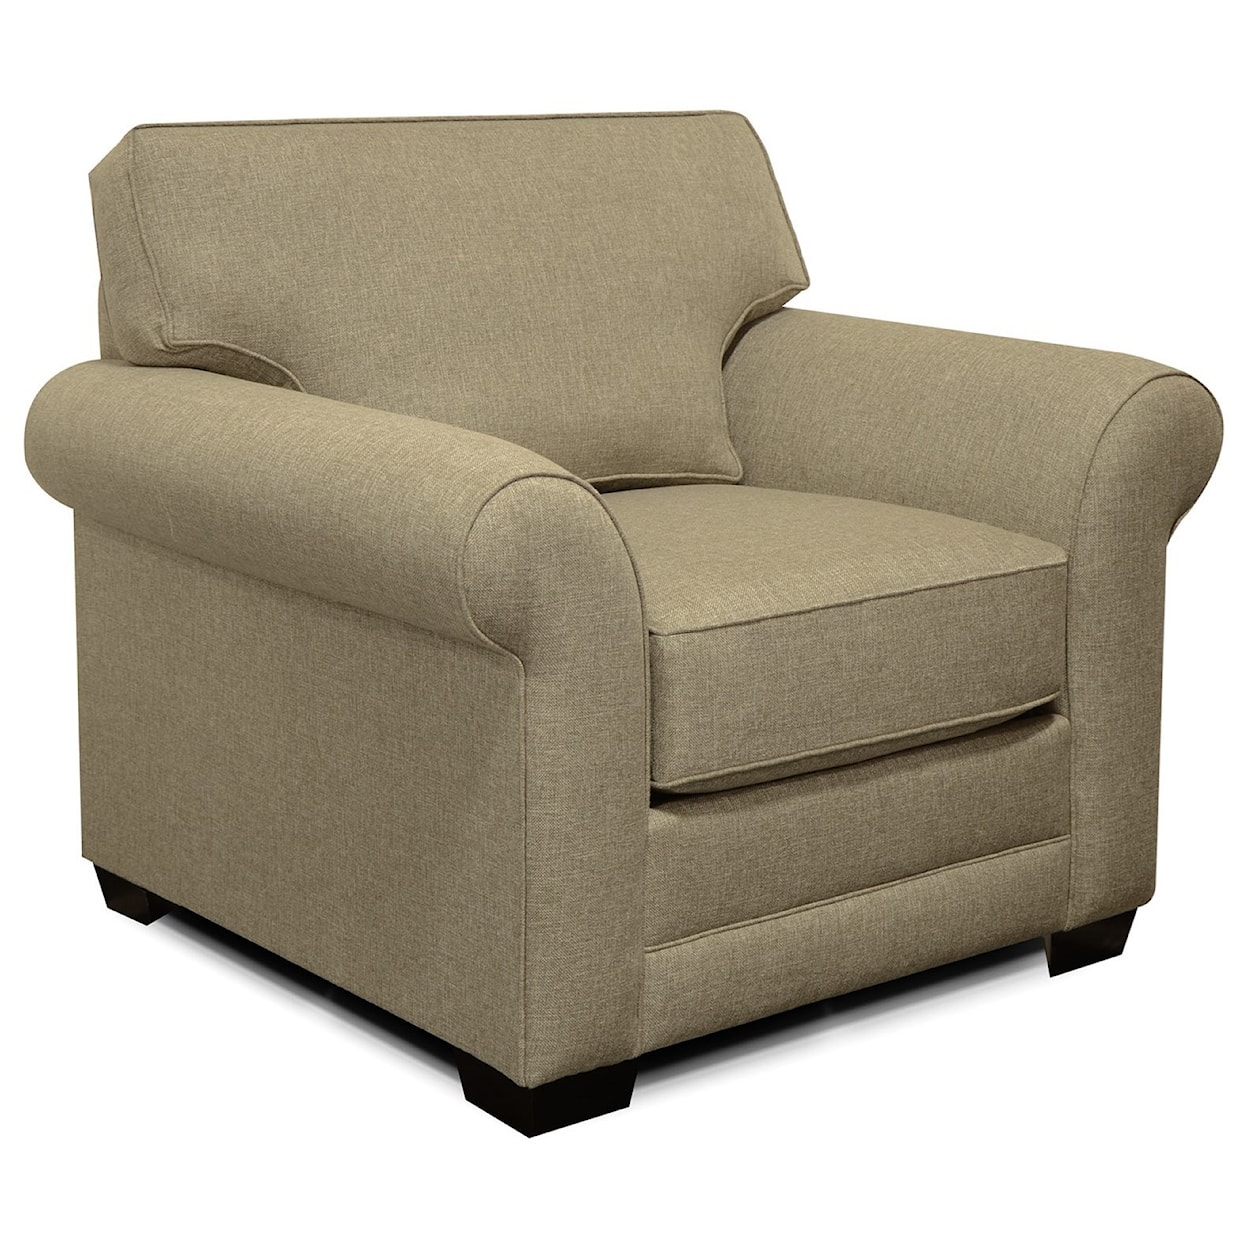 England 5630 Series Upholstered Chair